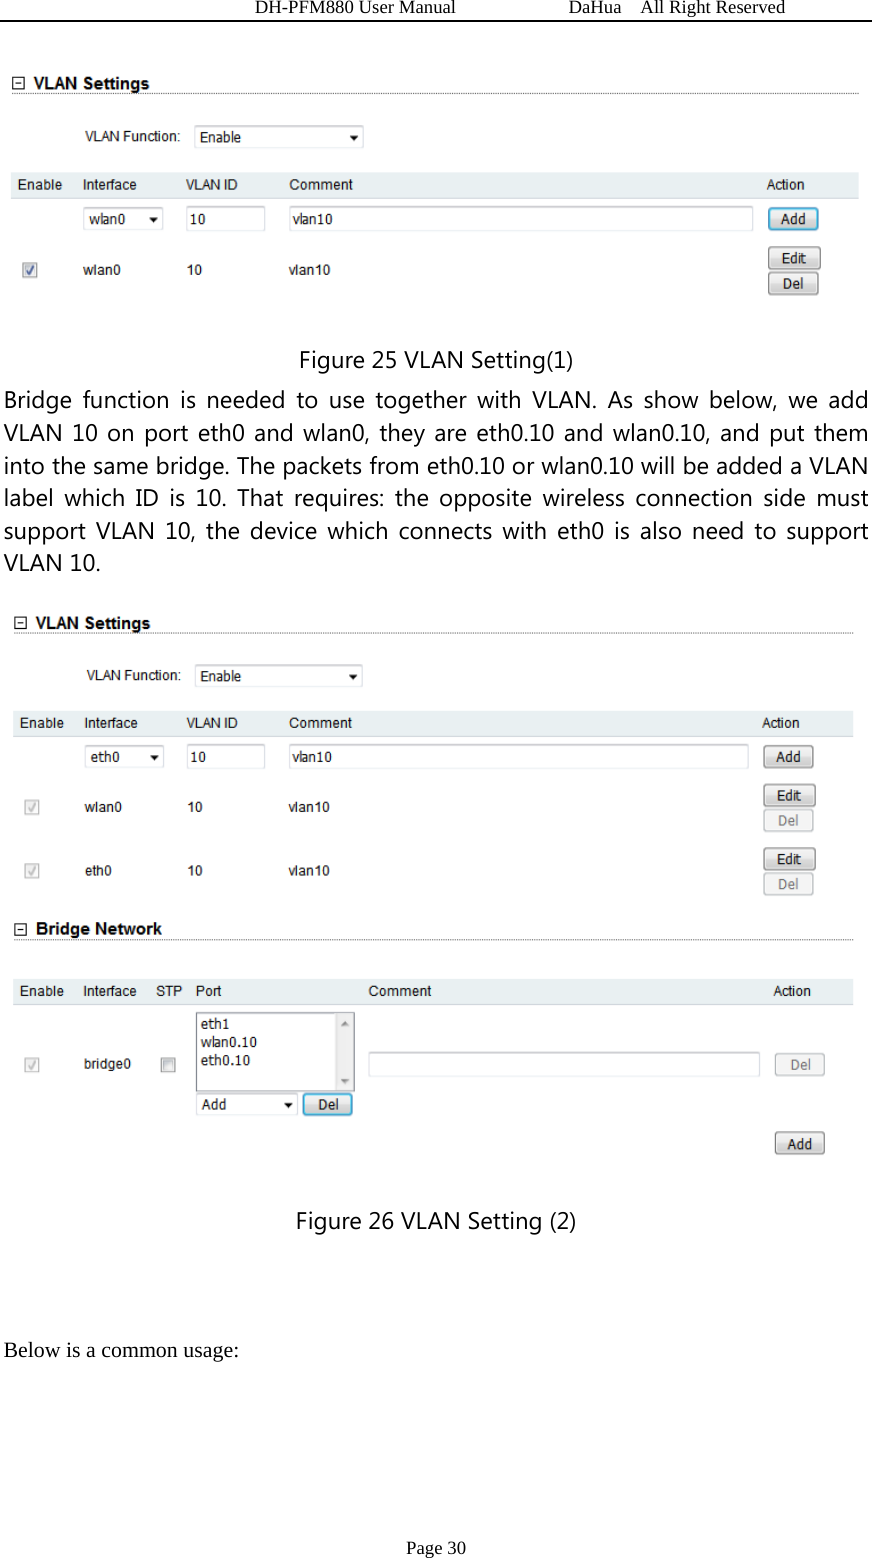   DH-PFM880 User Manual            DaHua  All Right Reserved Page 30  Figure 25 VLAN Setting(1) Bridge function is needed to use together with VLAN. As show below, we add VLAN 10 on port eth0 and wlan0, they are eth0.10 and wlan0.10, and put them into the same bridge. The packets from eth0.10 or wlan0.10 will be added a VLAN label which ID is 10. That requires: the opposite wireless connection side must support VLAN 10, the device which connects with eth0 is also need to support VLAN 10.    Figure 26 VLAN Setting (2)  Below is a common usage: 